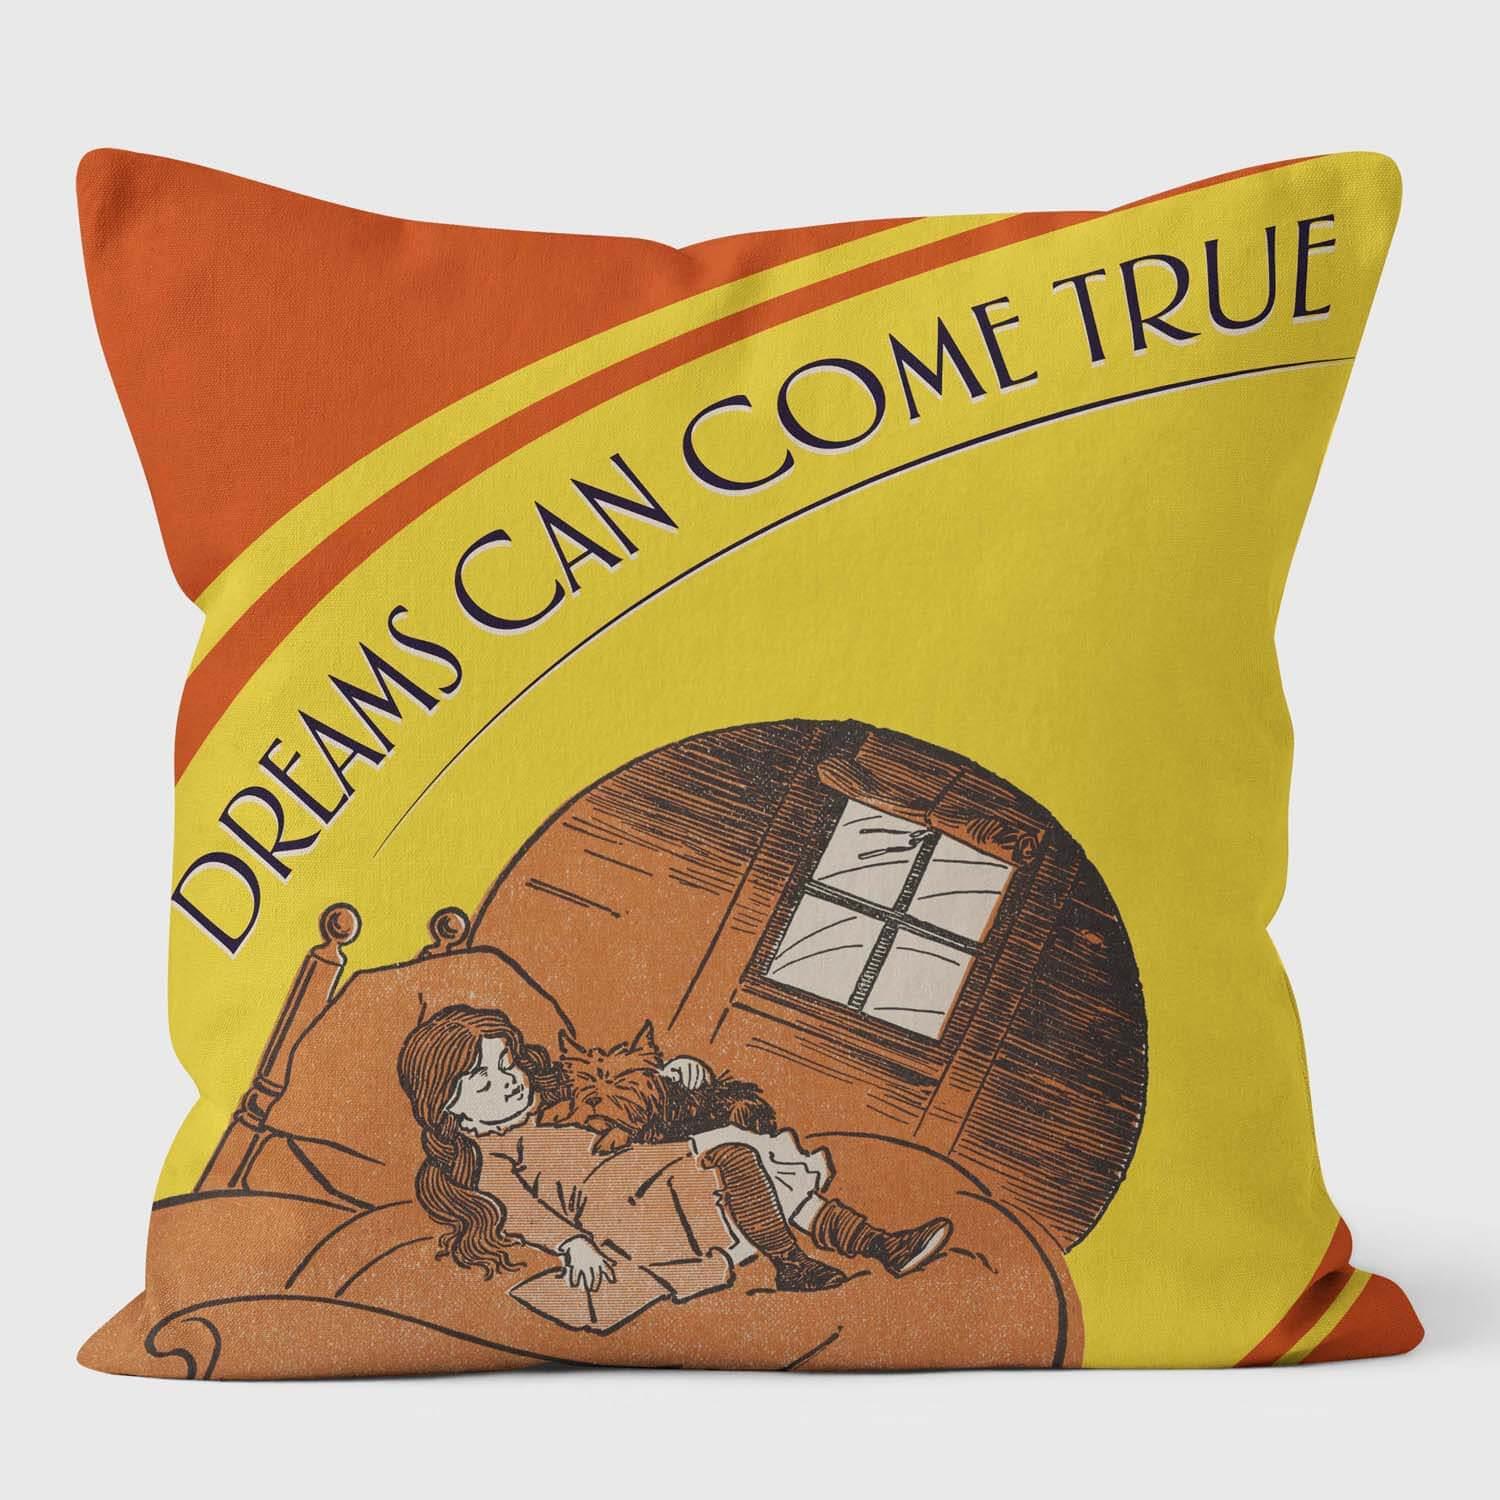 Dorothy Dreams Come True - The Wizard of Oz Cushion - Handmade Cushions UK - WeLoveCushions